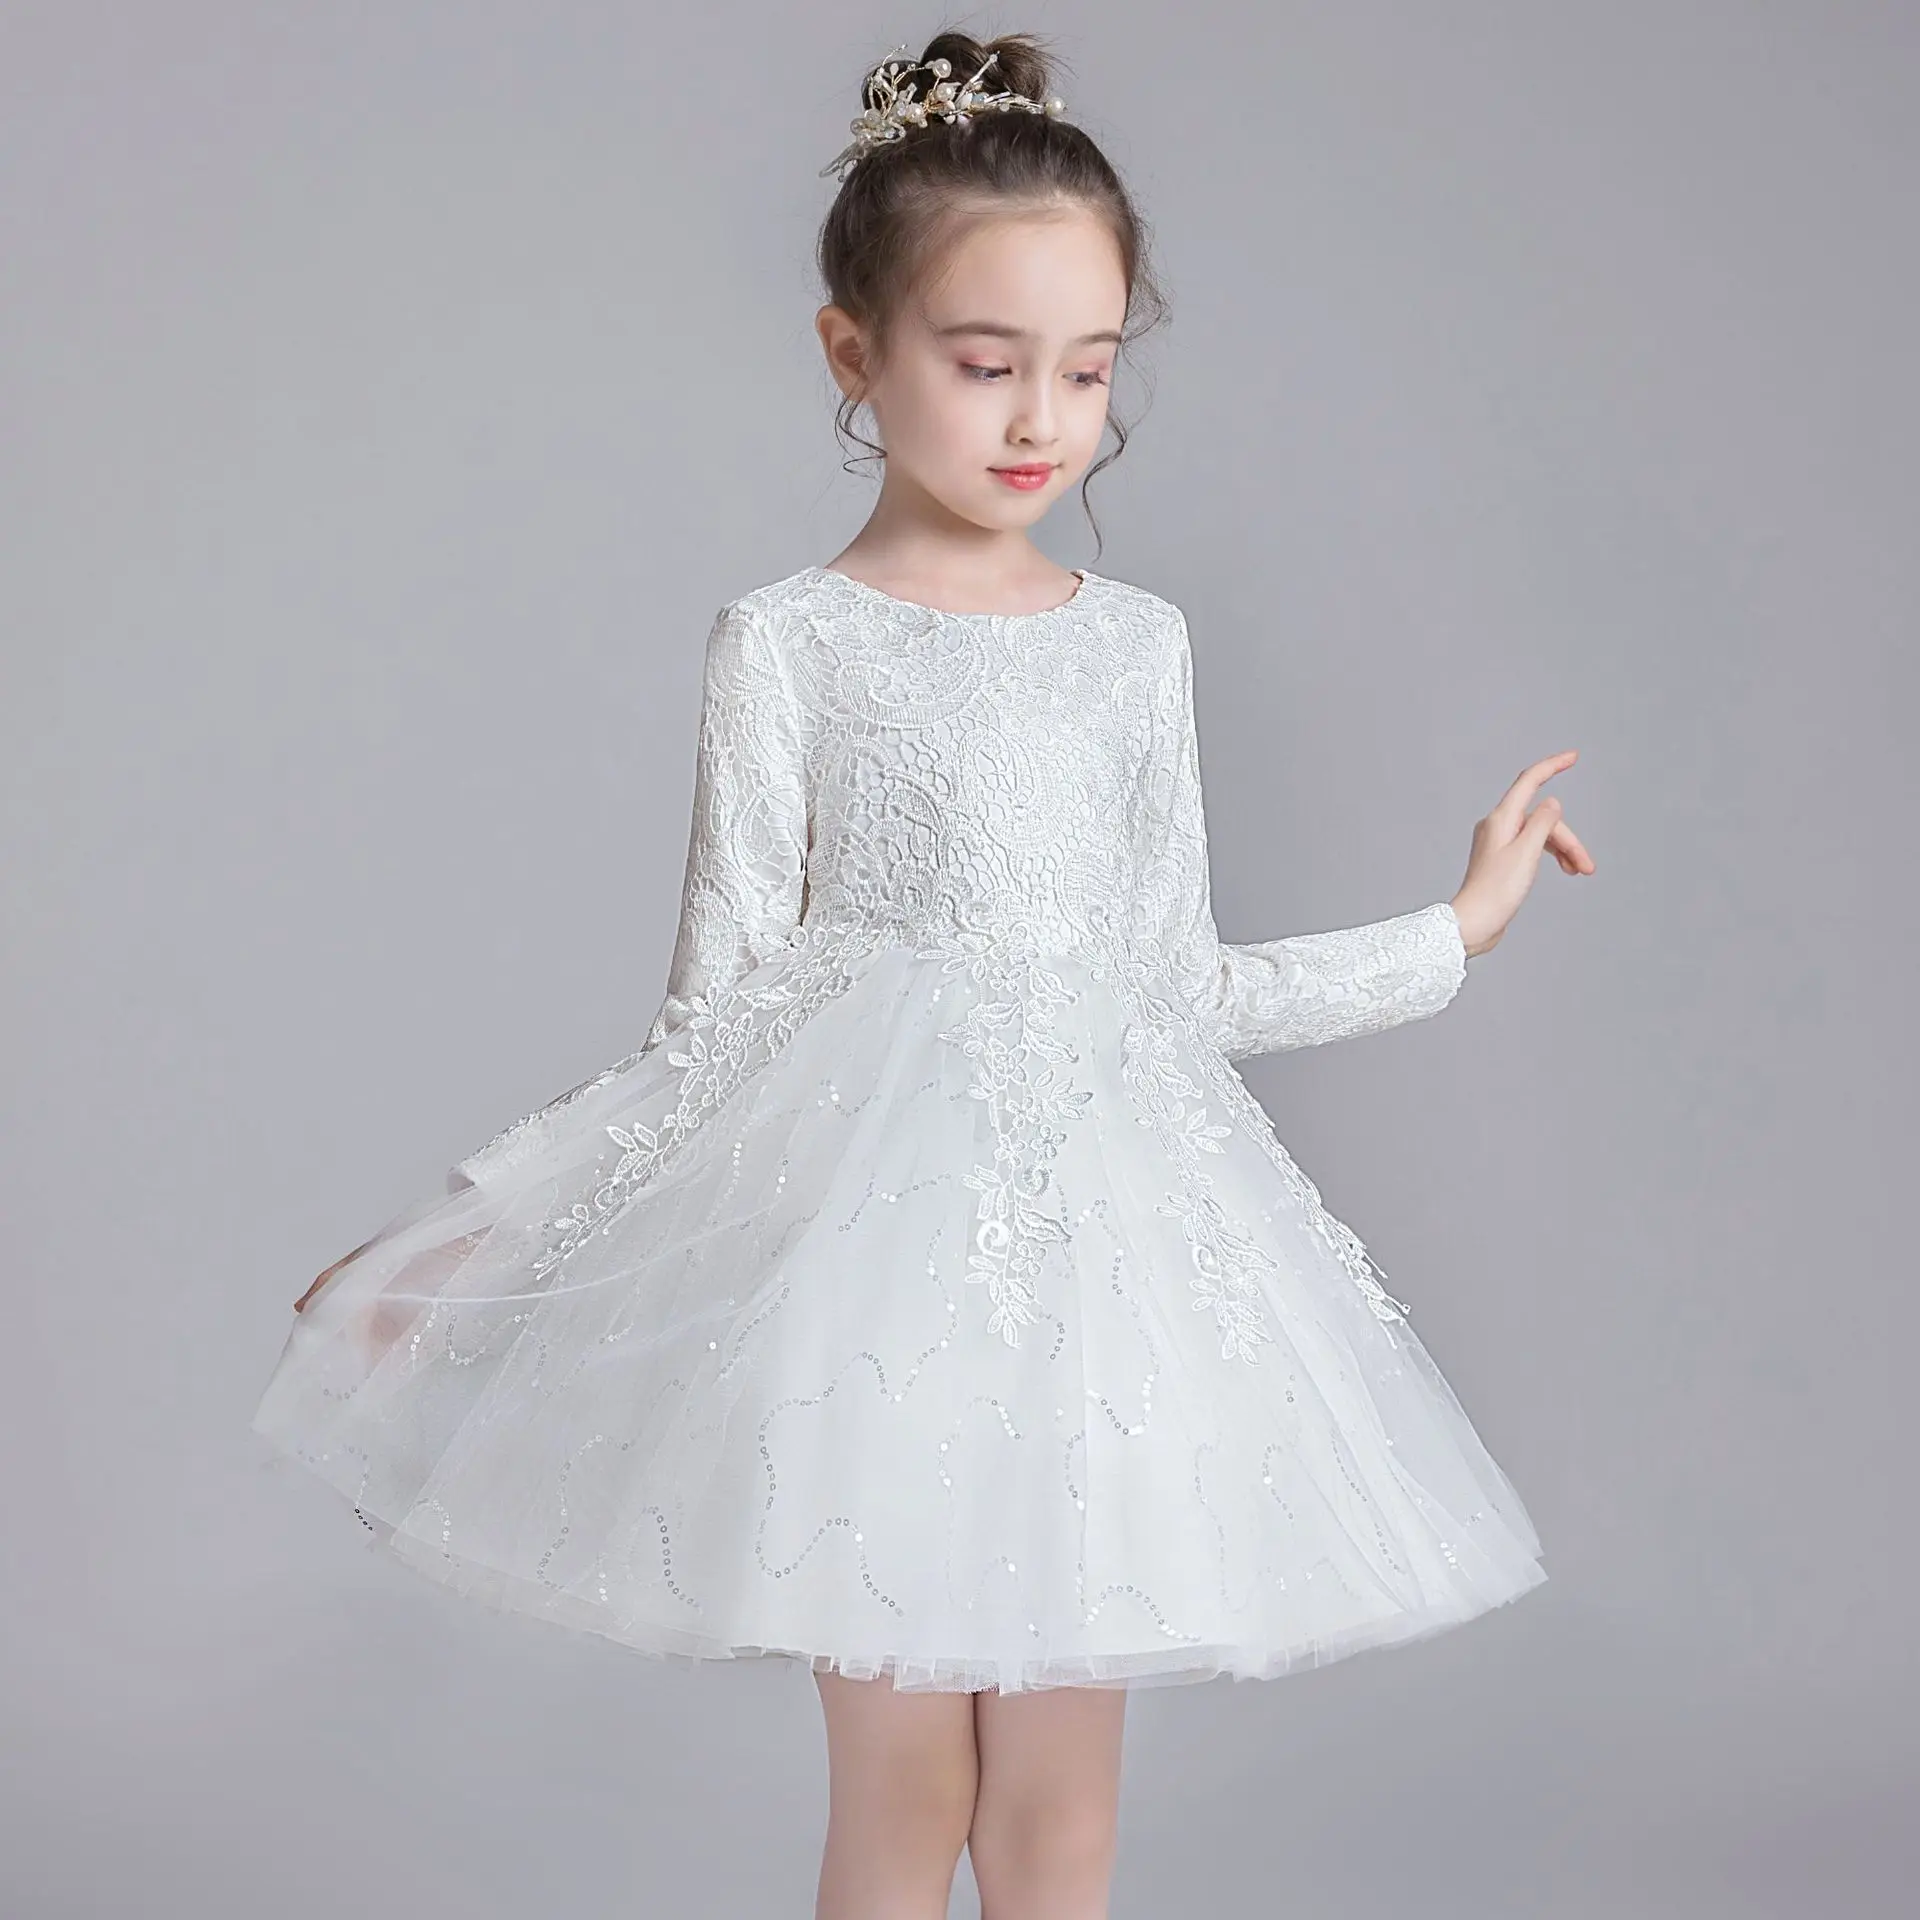 Autumn Winter New Princess Flower Girl Wedding Party Bridesmaid Group Dress Girl Birthday Party Dinner Party Long Sleeve Dress